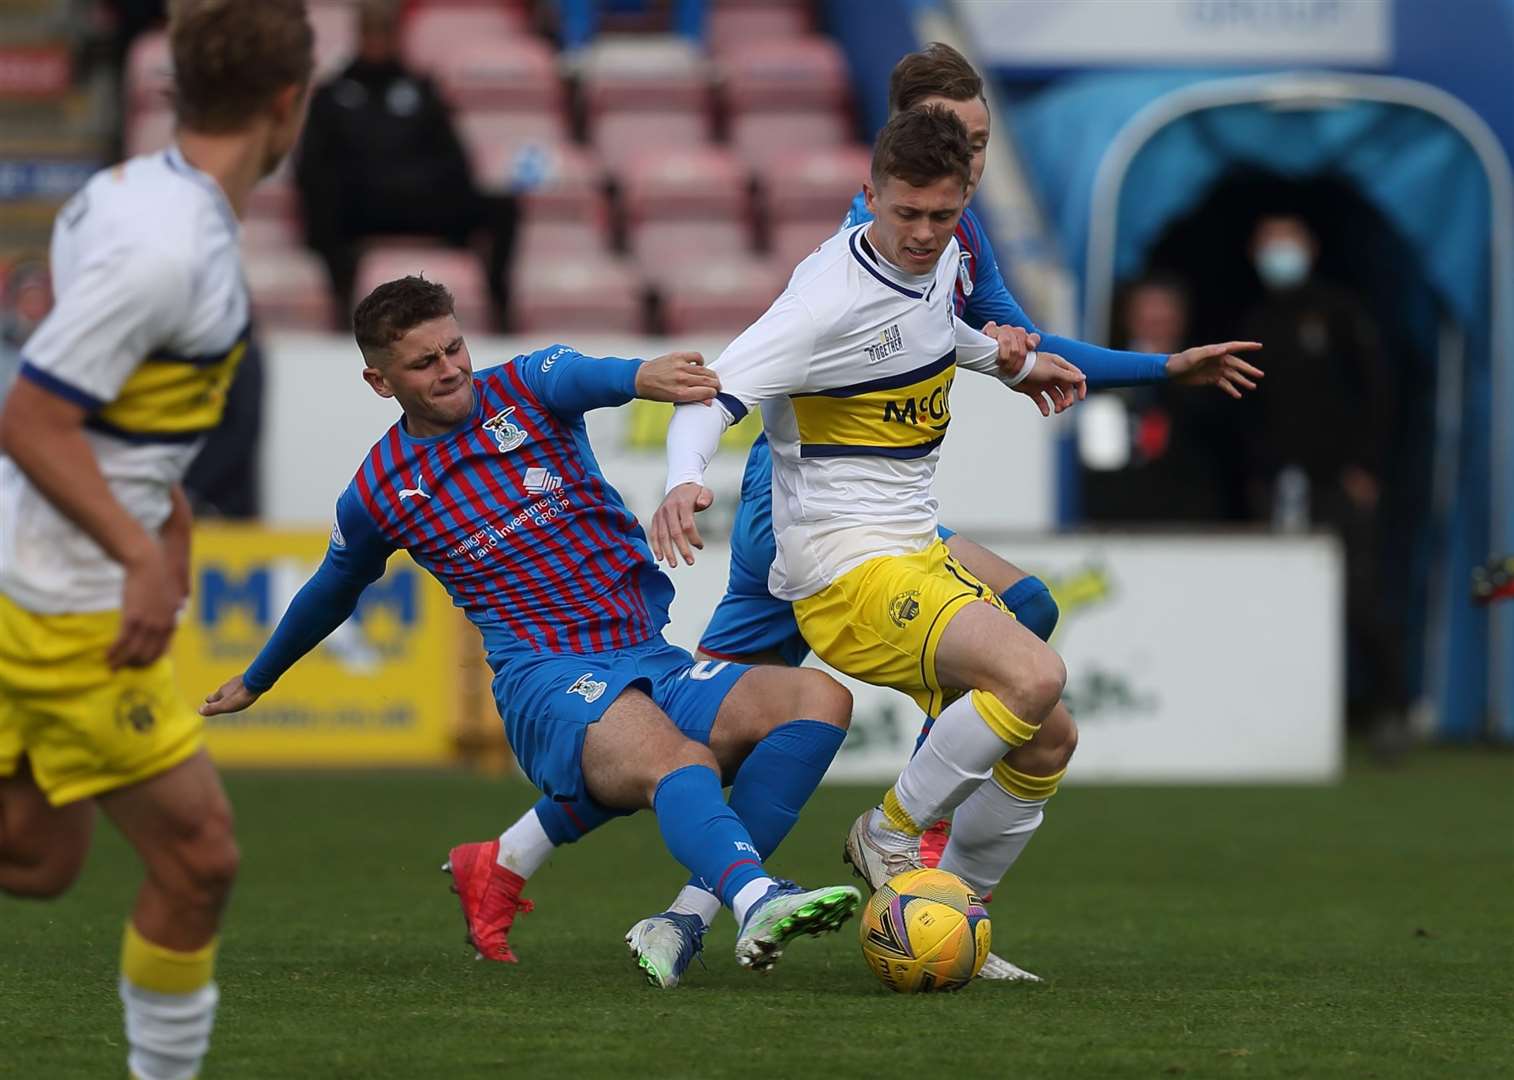 Picture - Ken Macpherson, Inverness. Inverness CT(2) v Morton(0). 16.10.21. ICT’s Reece McAlear wins the ball from Morton's Jimmy Knowles.